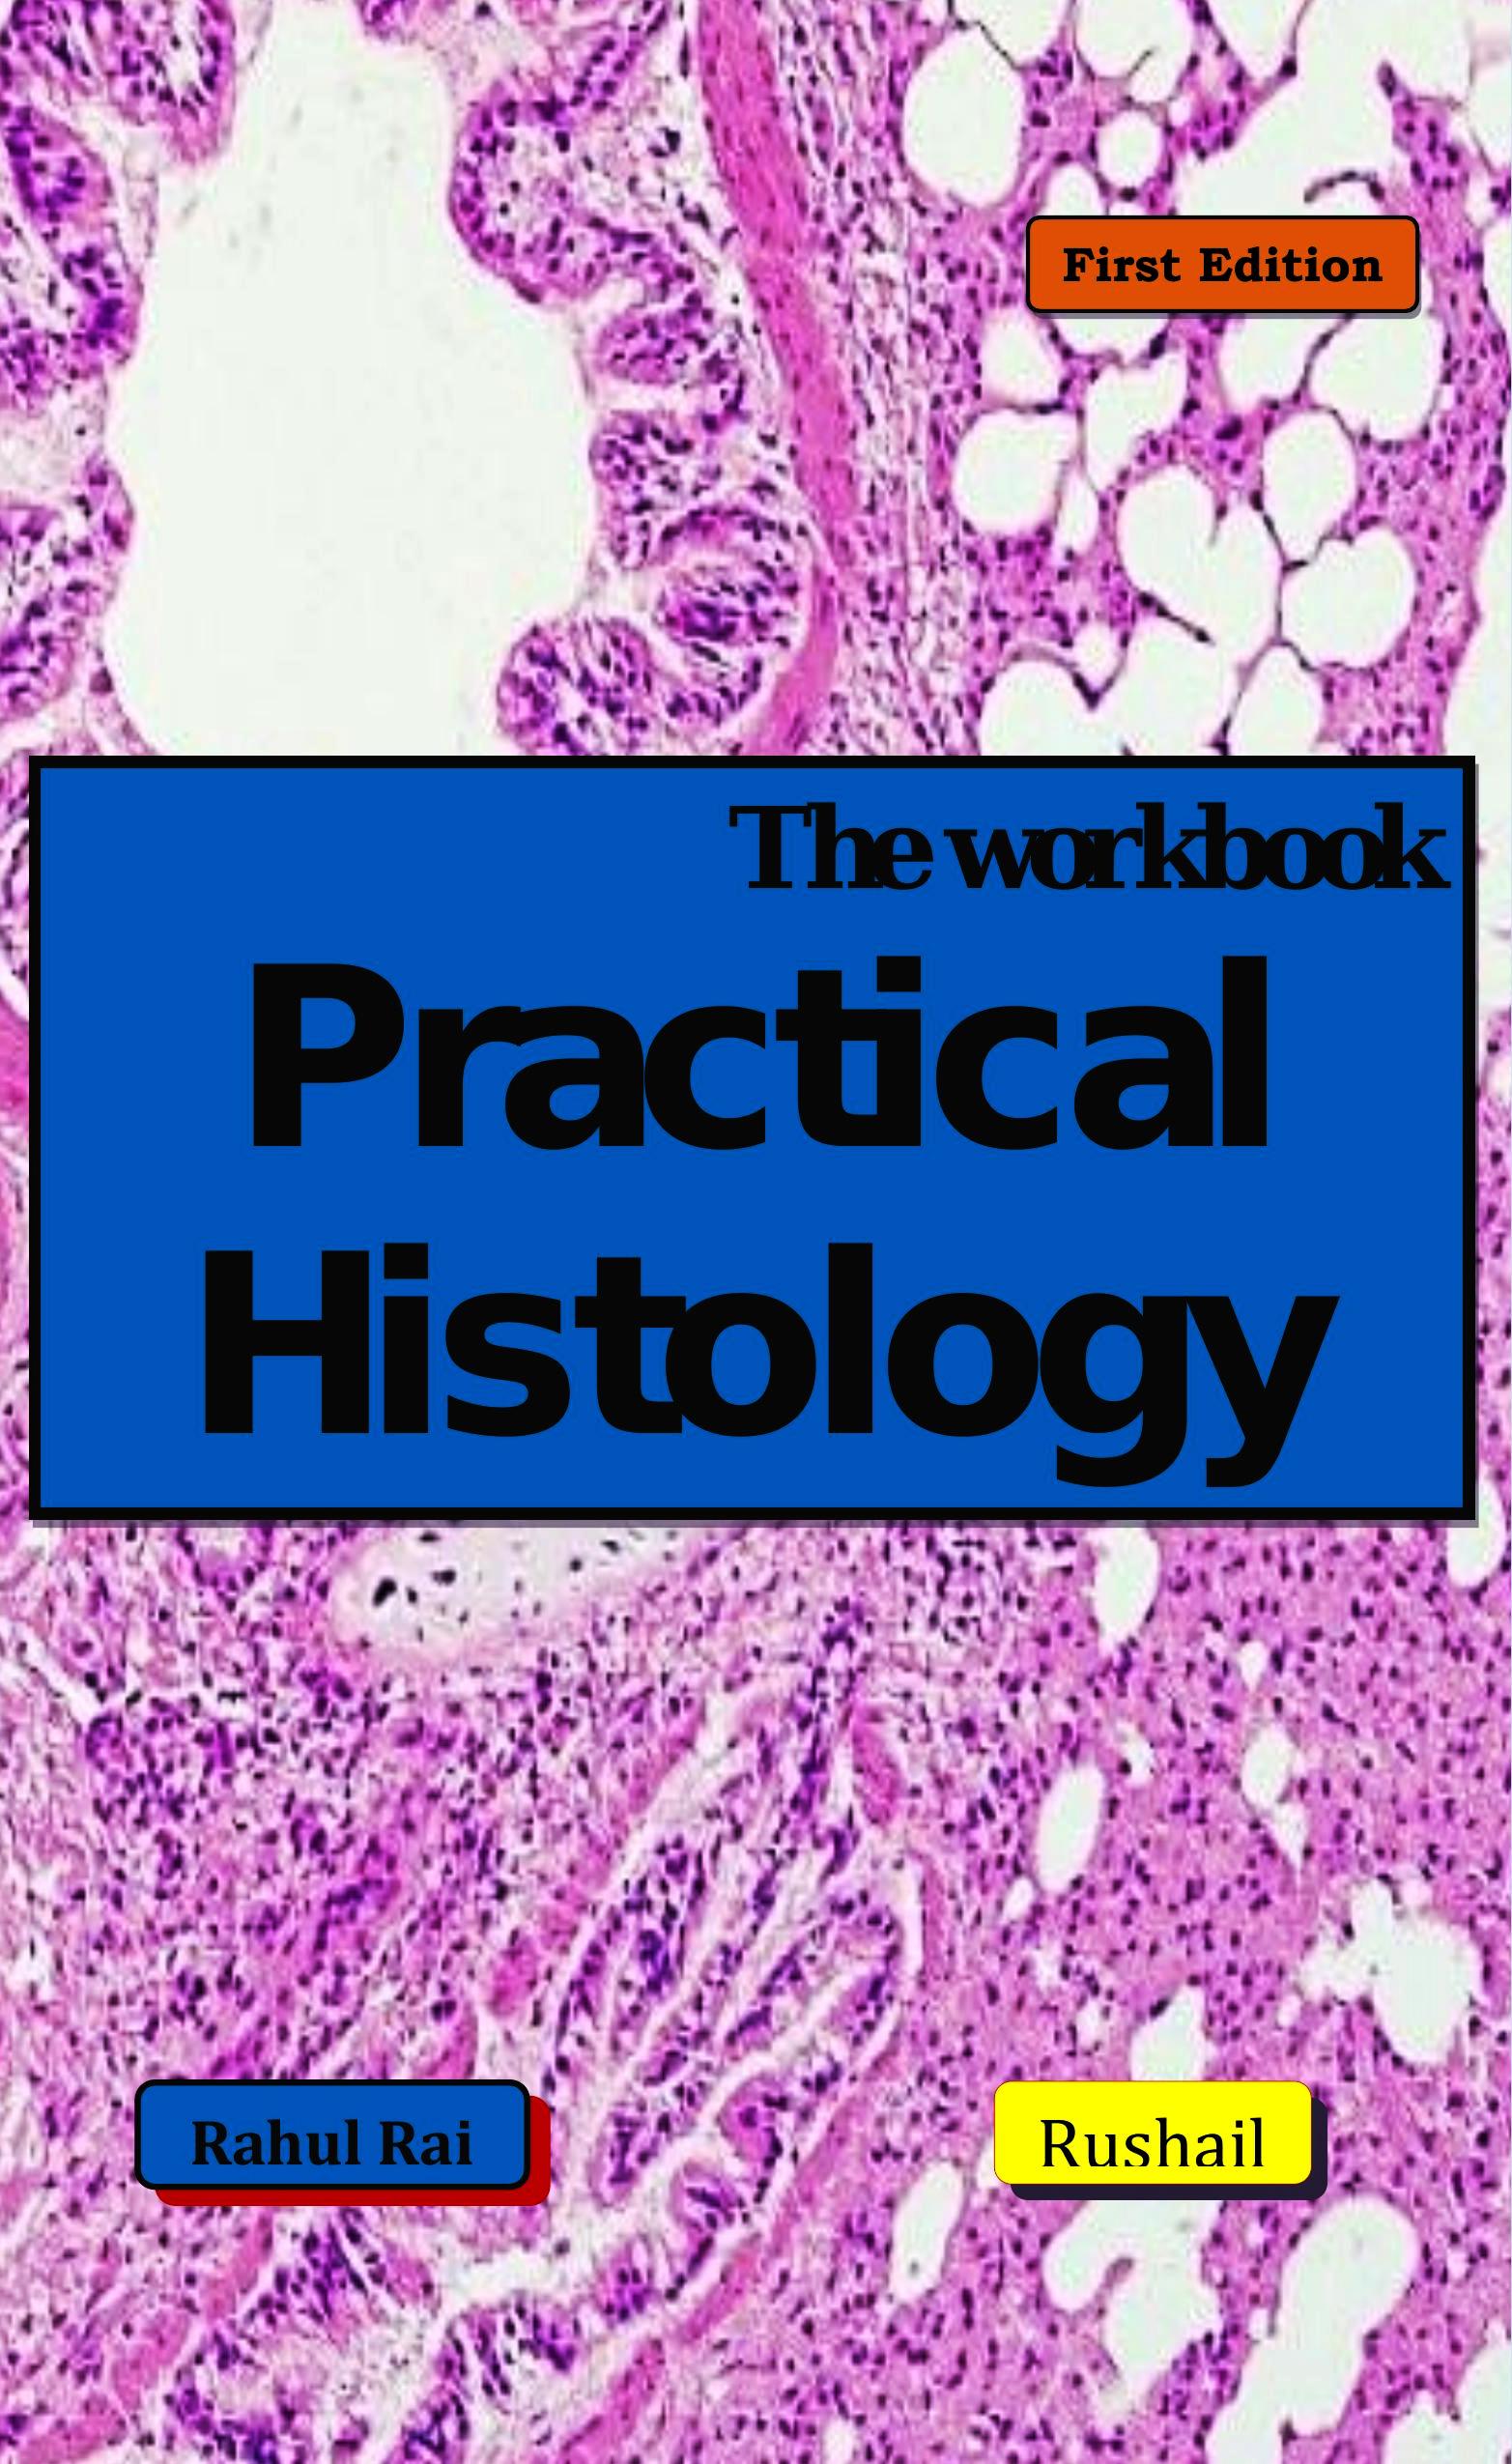 The Workbook of Practical Histology